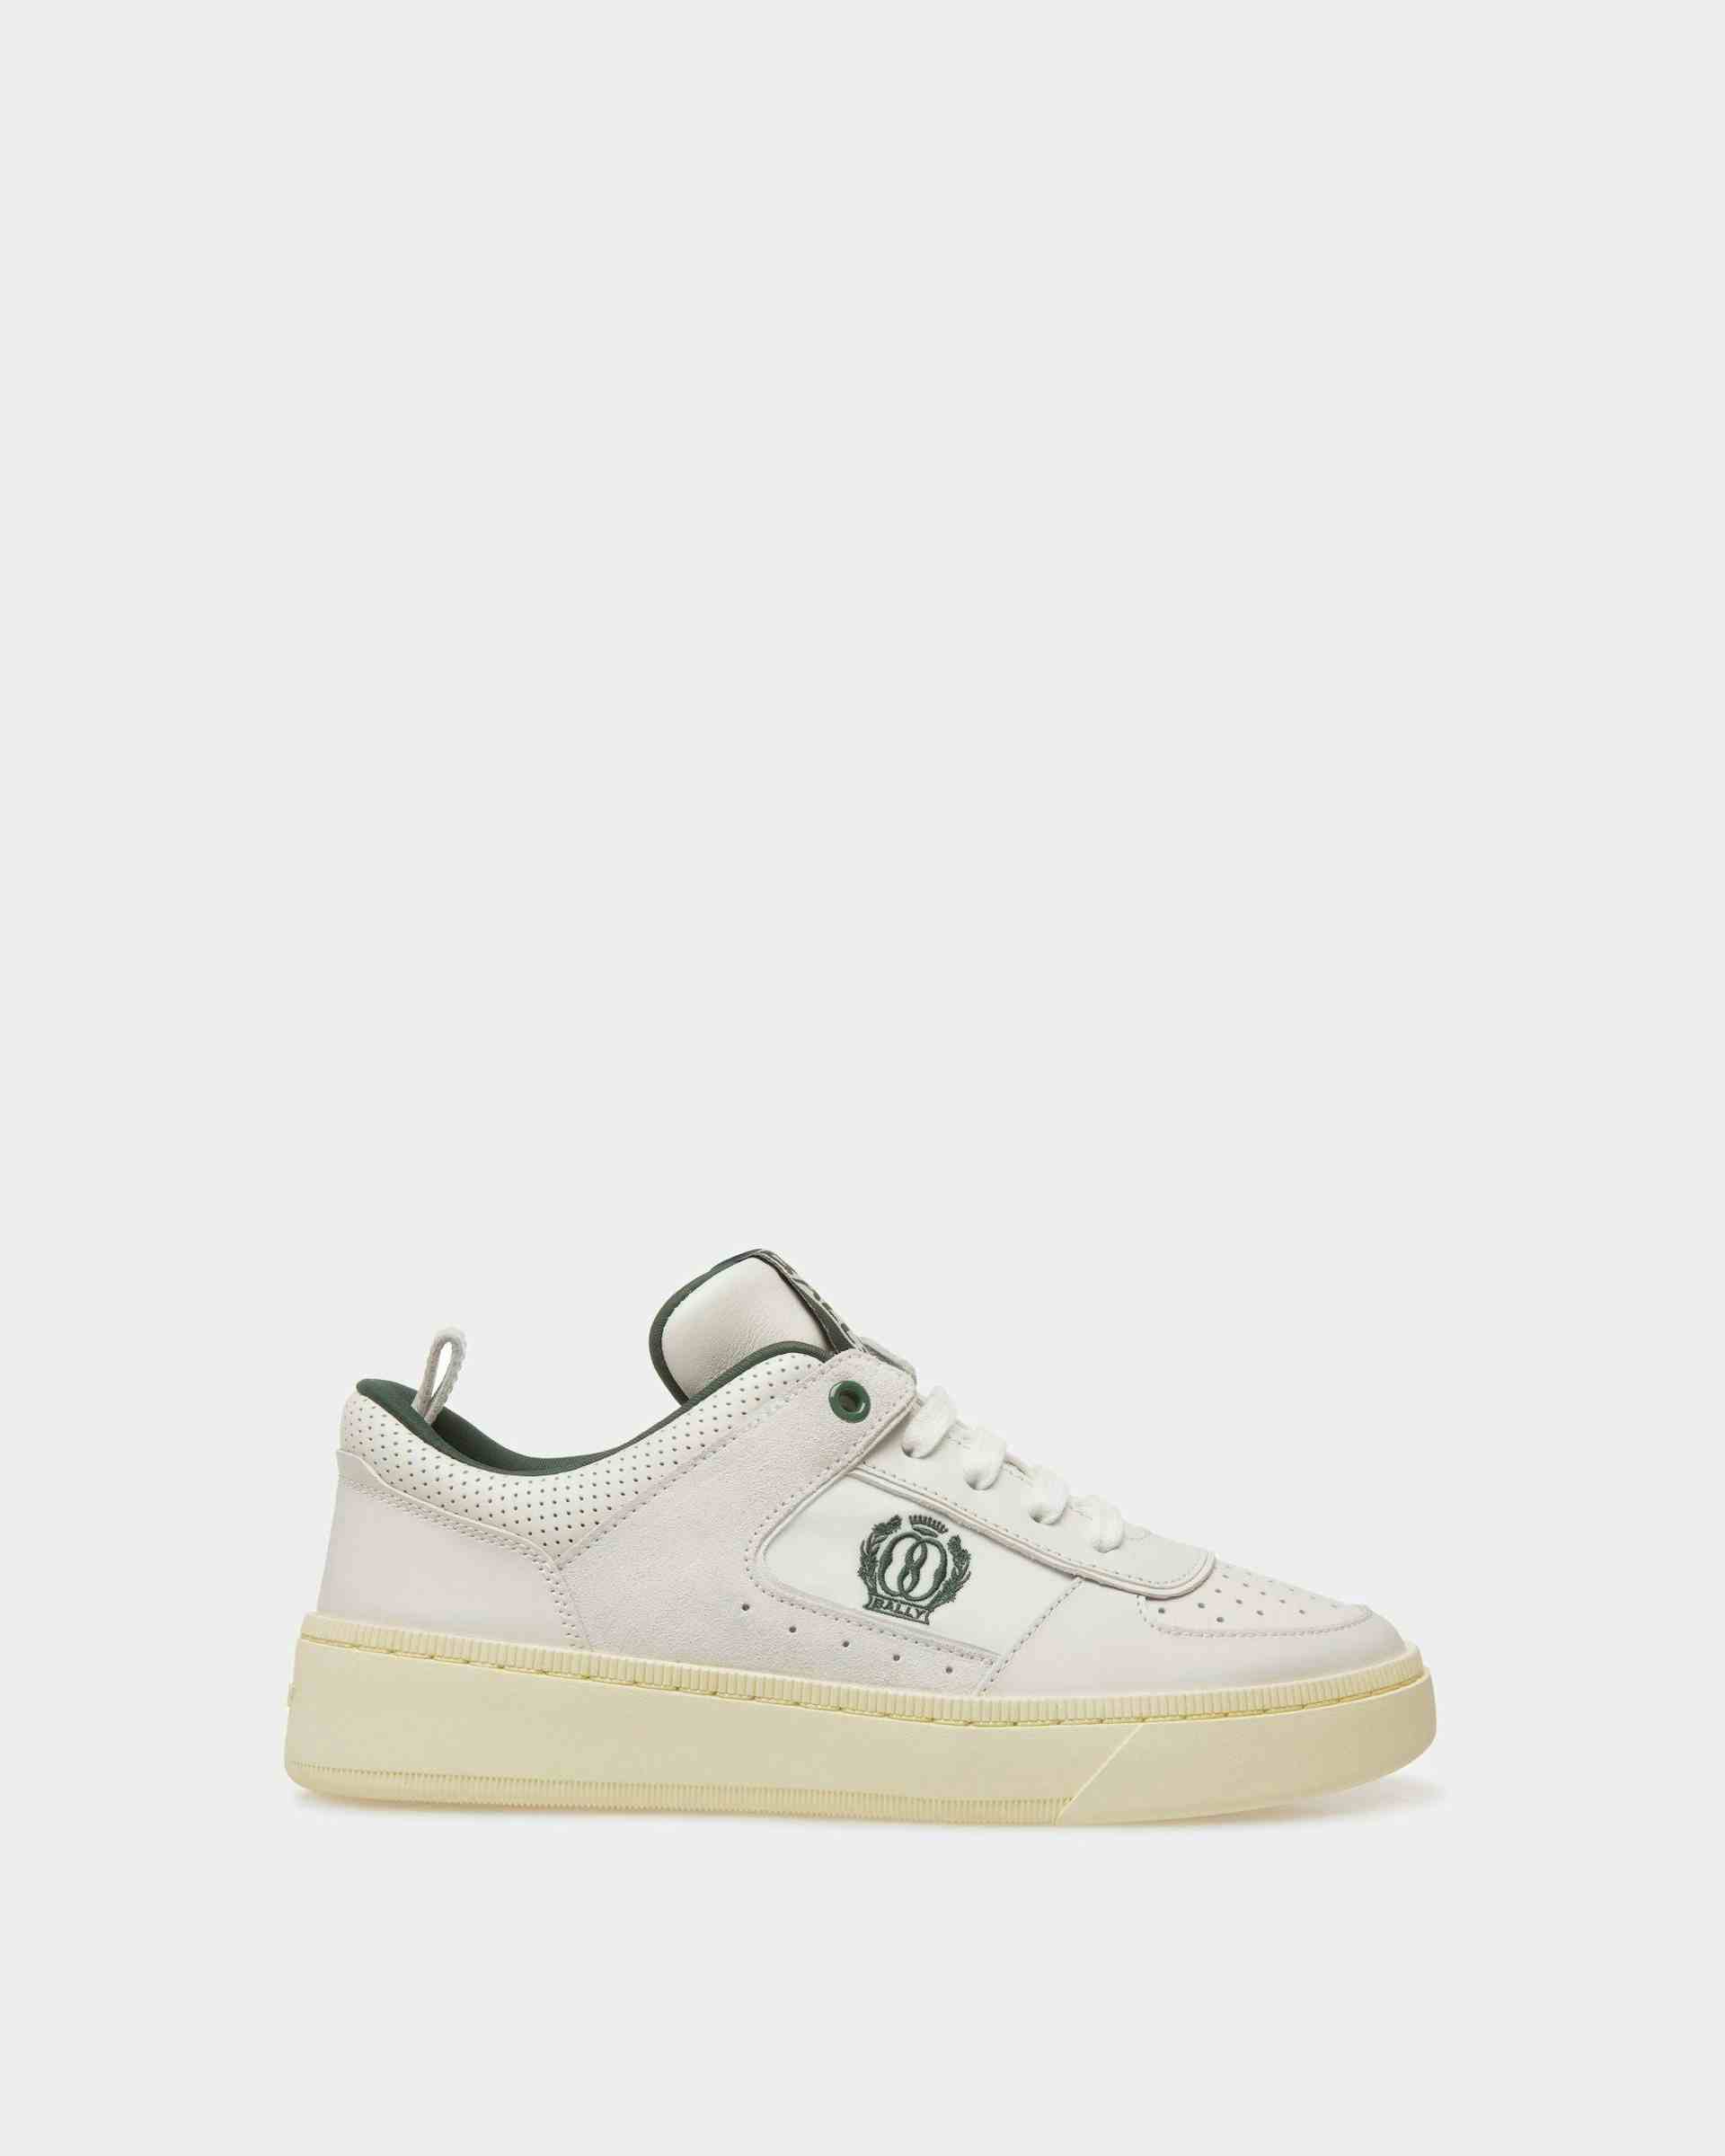 Raise Sneakers In White And Green Leather - Women's - Bally